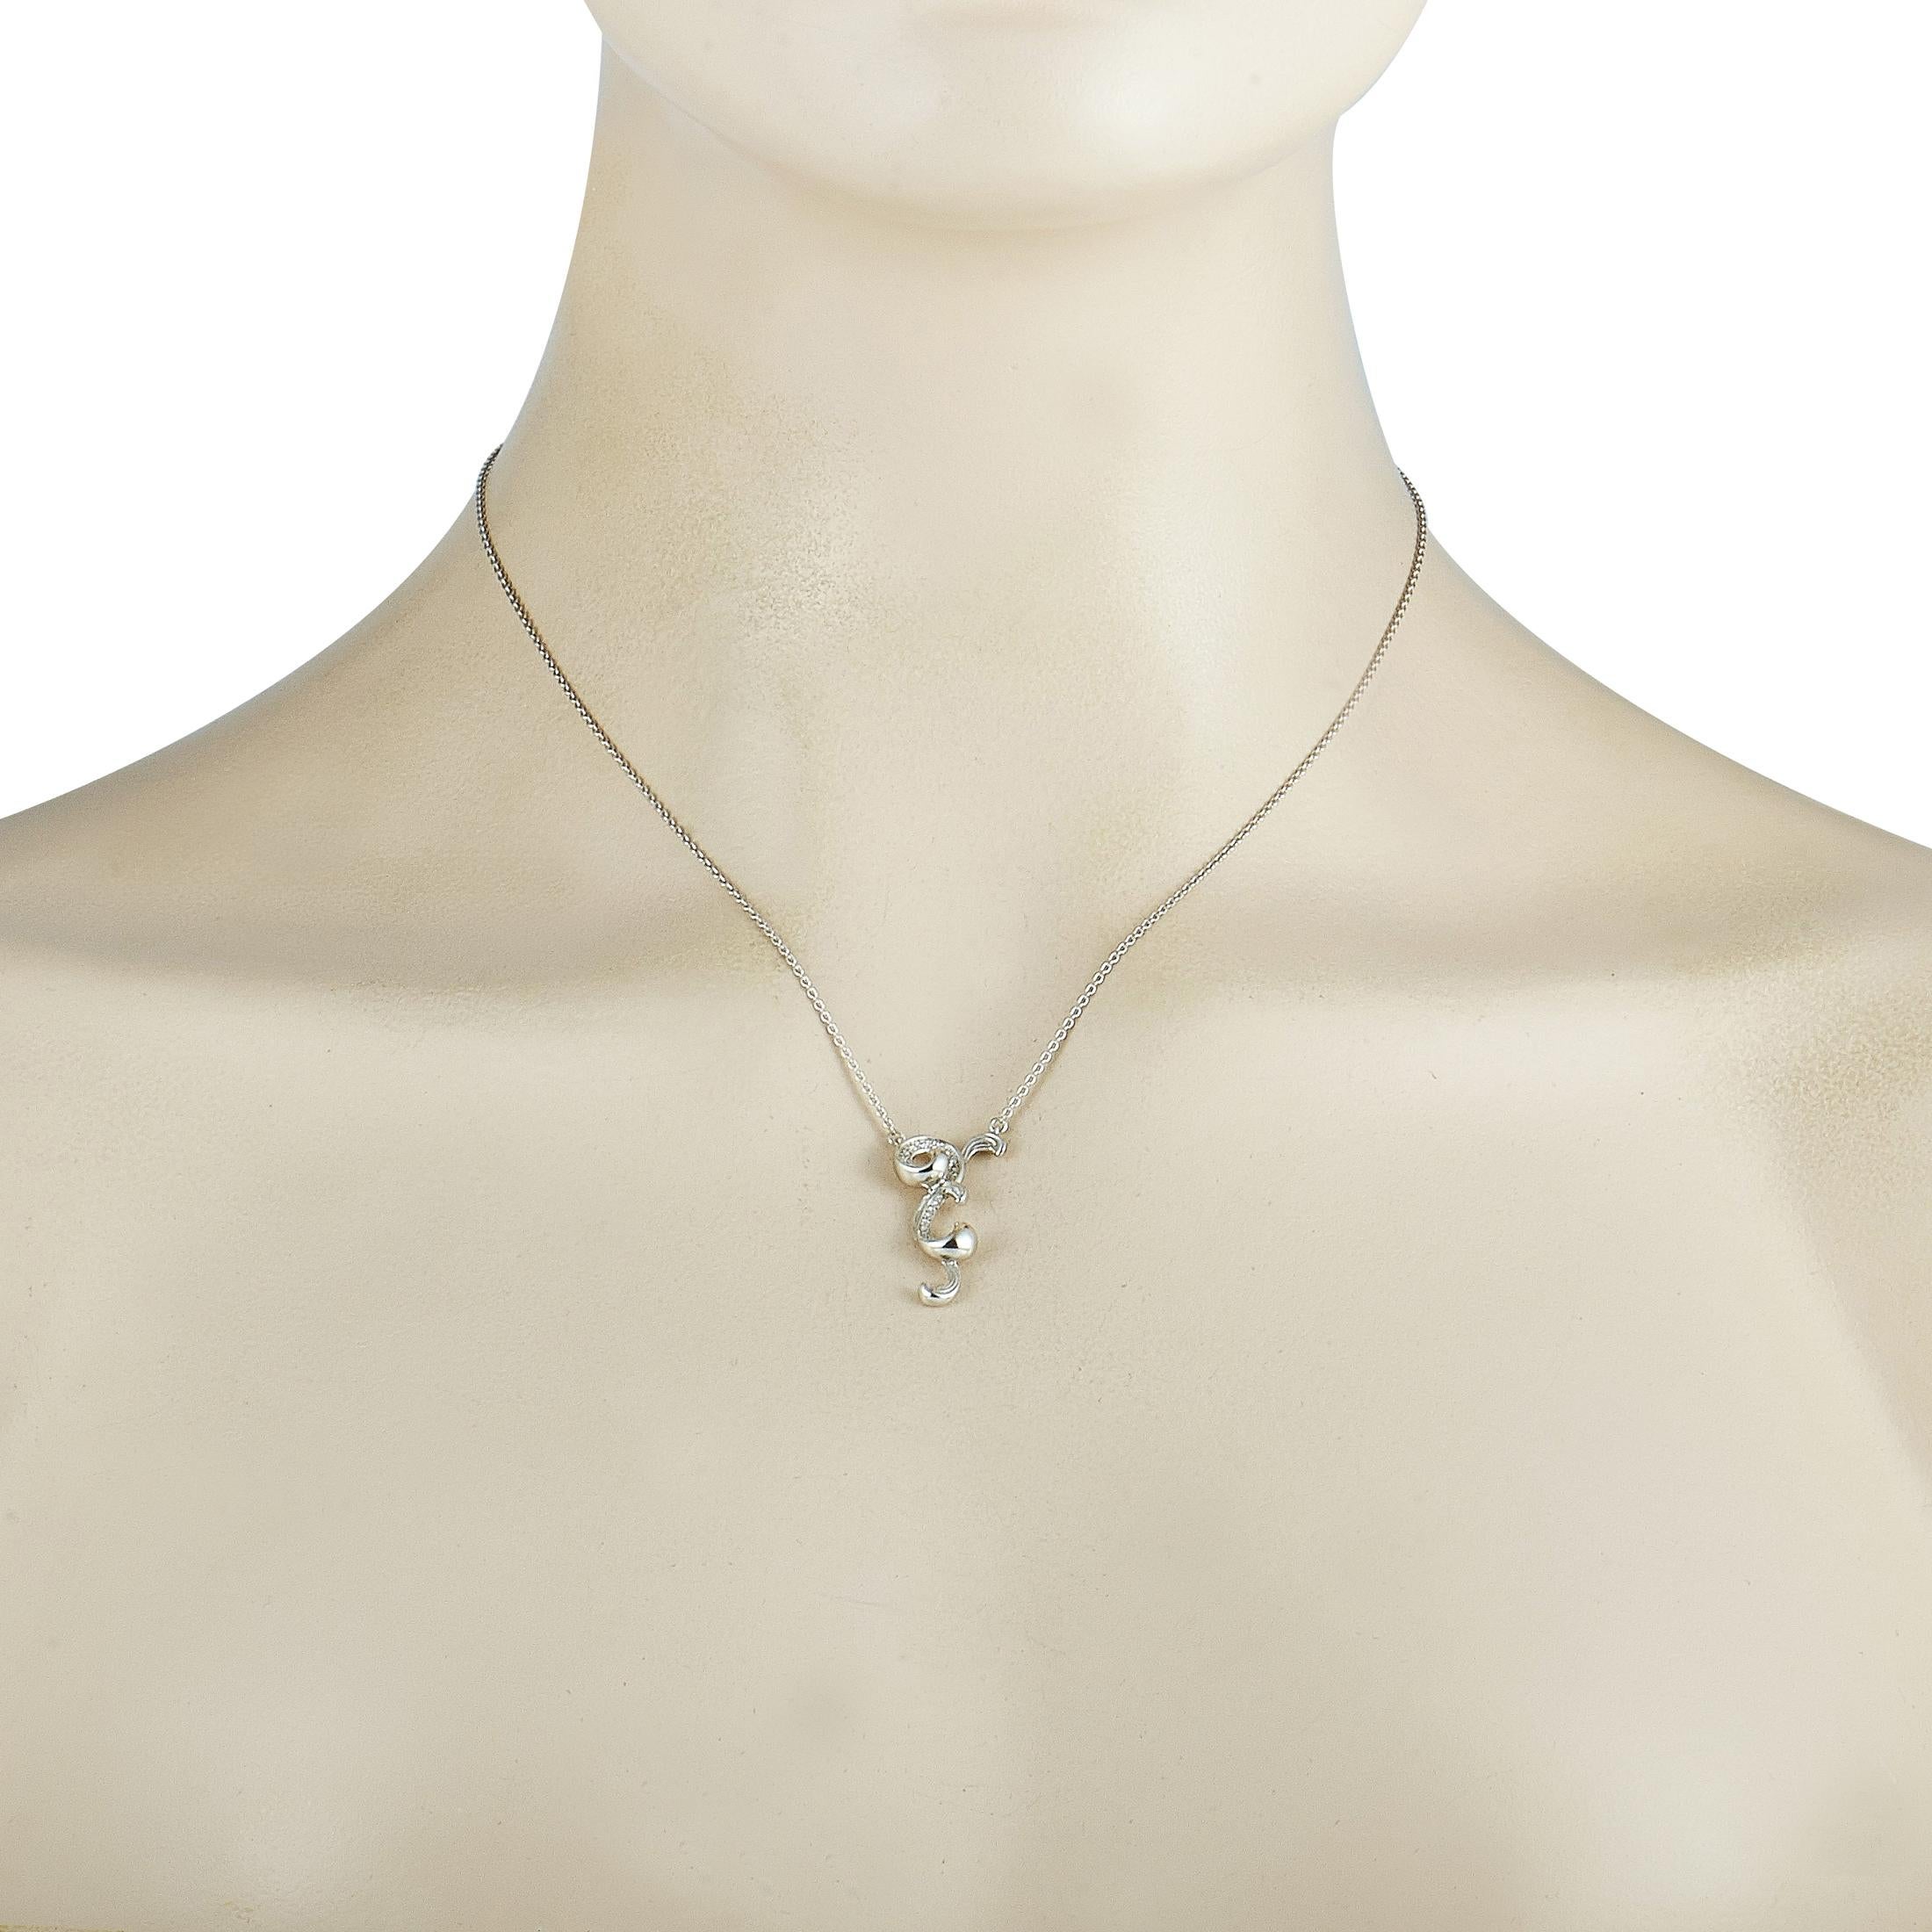 he Carrera y Carrera “Origen Mini” necklace is made of 18K white gold and embellished with diamonds that amount to 0.13 carats. The necklace weighs 5.98 grams and is presented with a 16” chain and a pendant that measures 1.12” in length and 0.55” in